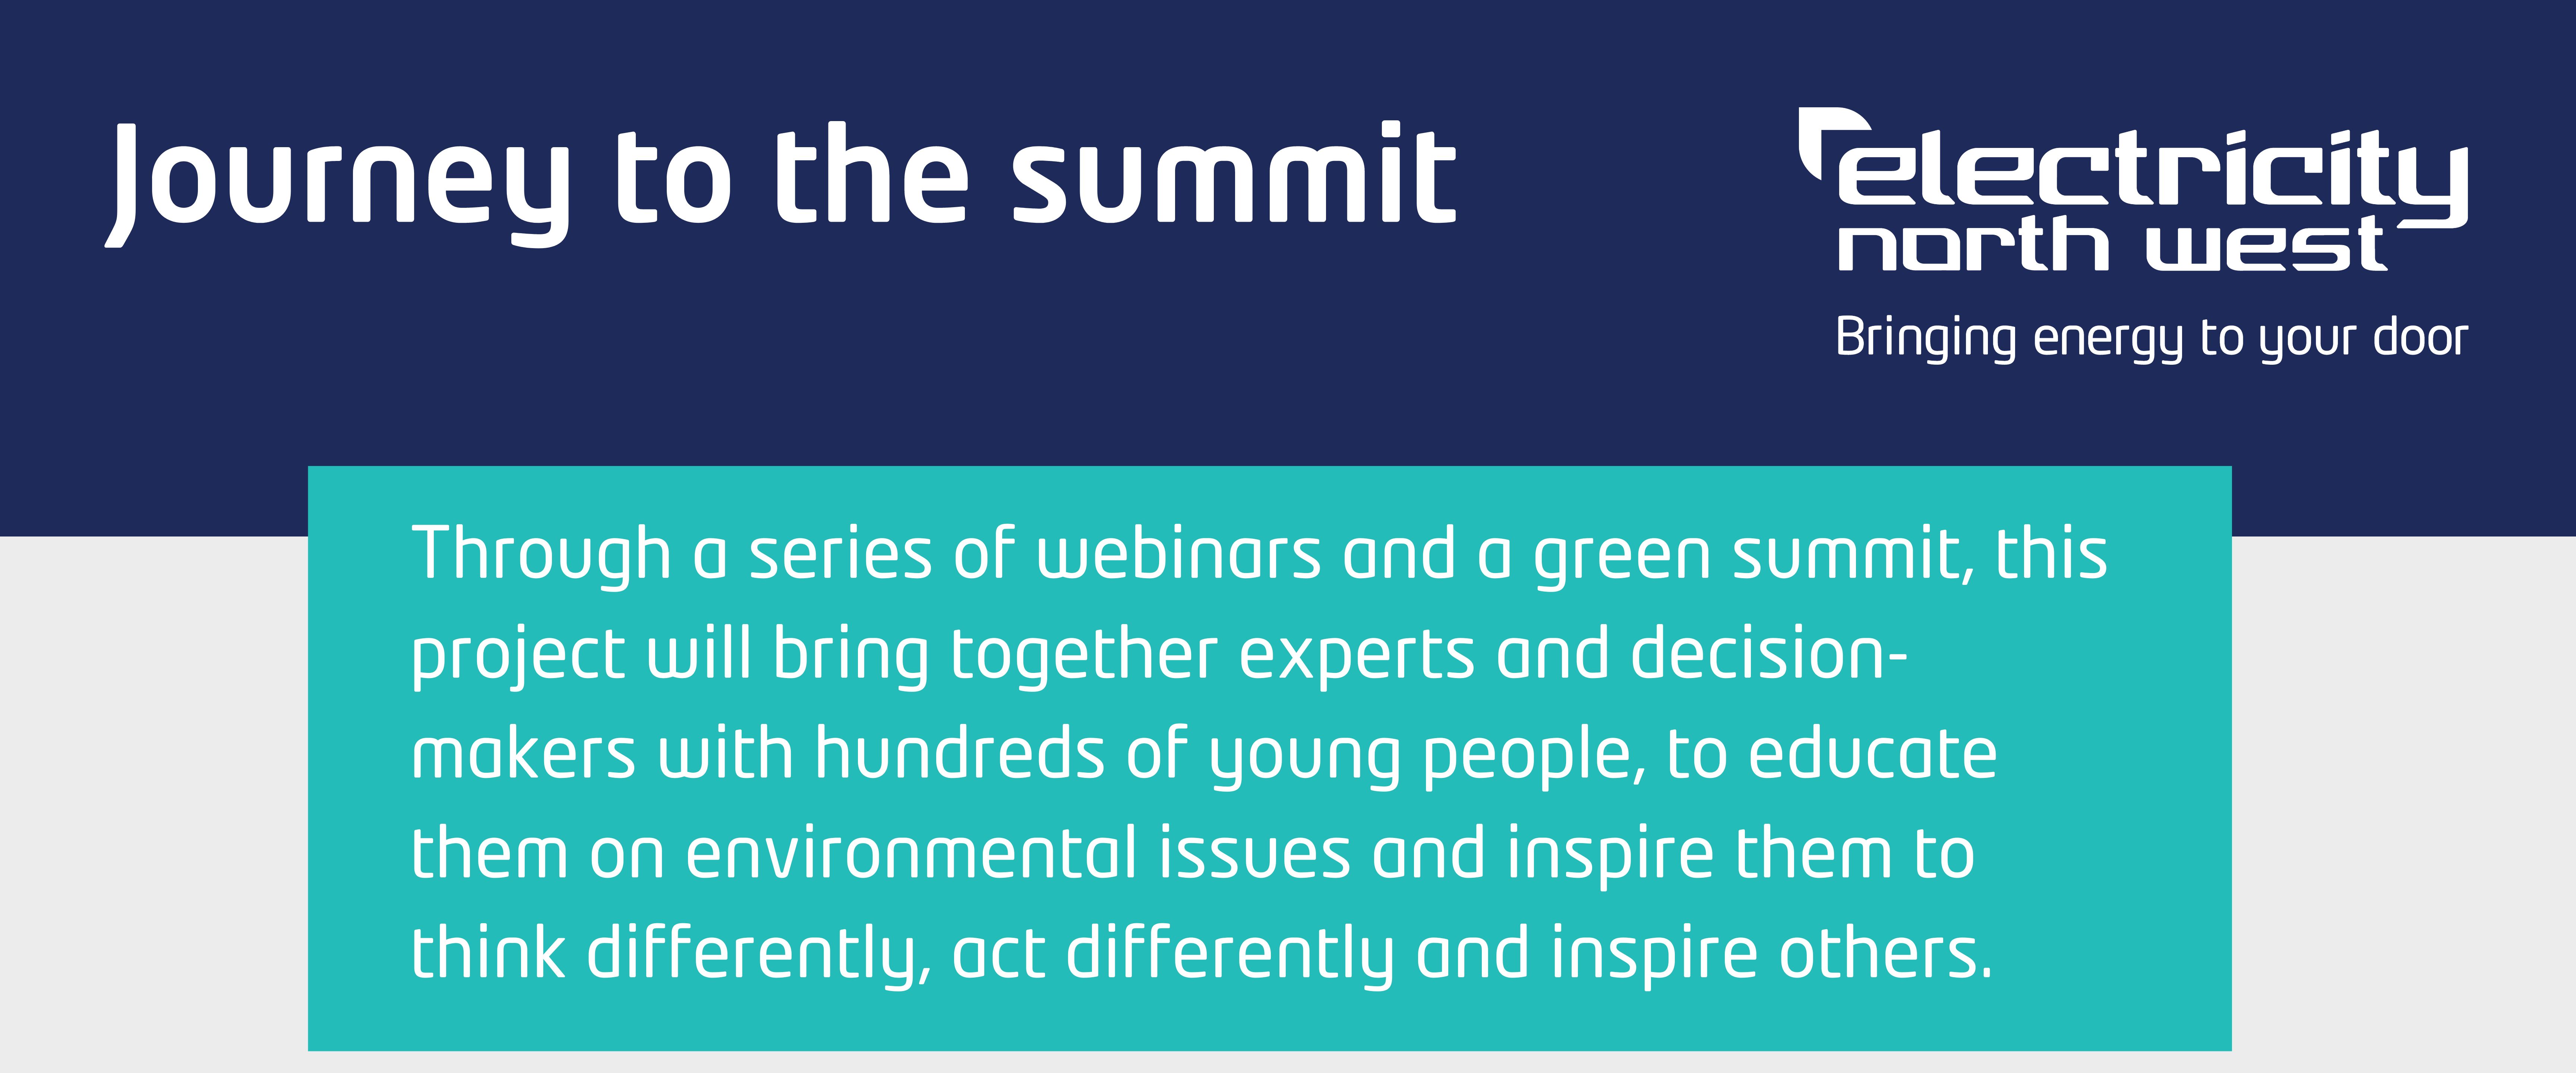 Journey to the summit, Through a series of webinars and a green summit, this project will bring together experts and decision-makers with hundreds of young people, to educate them on environmental issues and inspire them to think differently, act differently and inspire others.